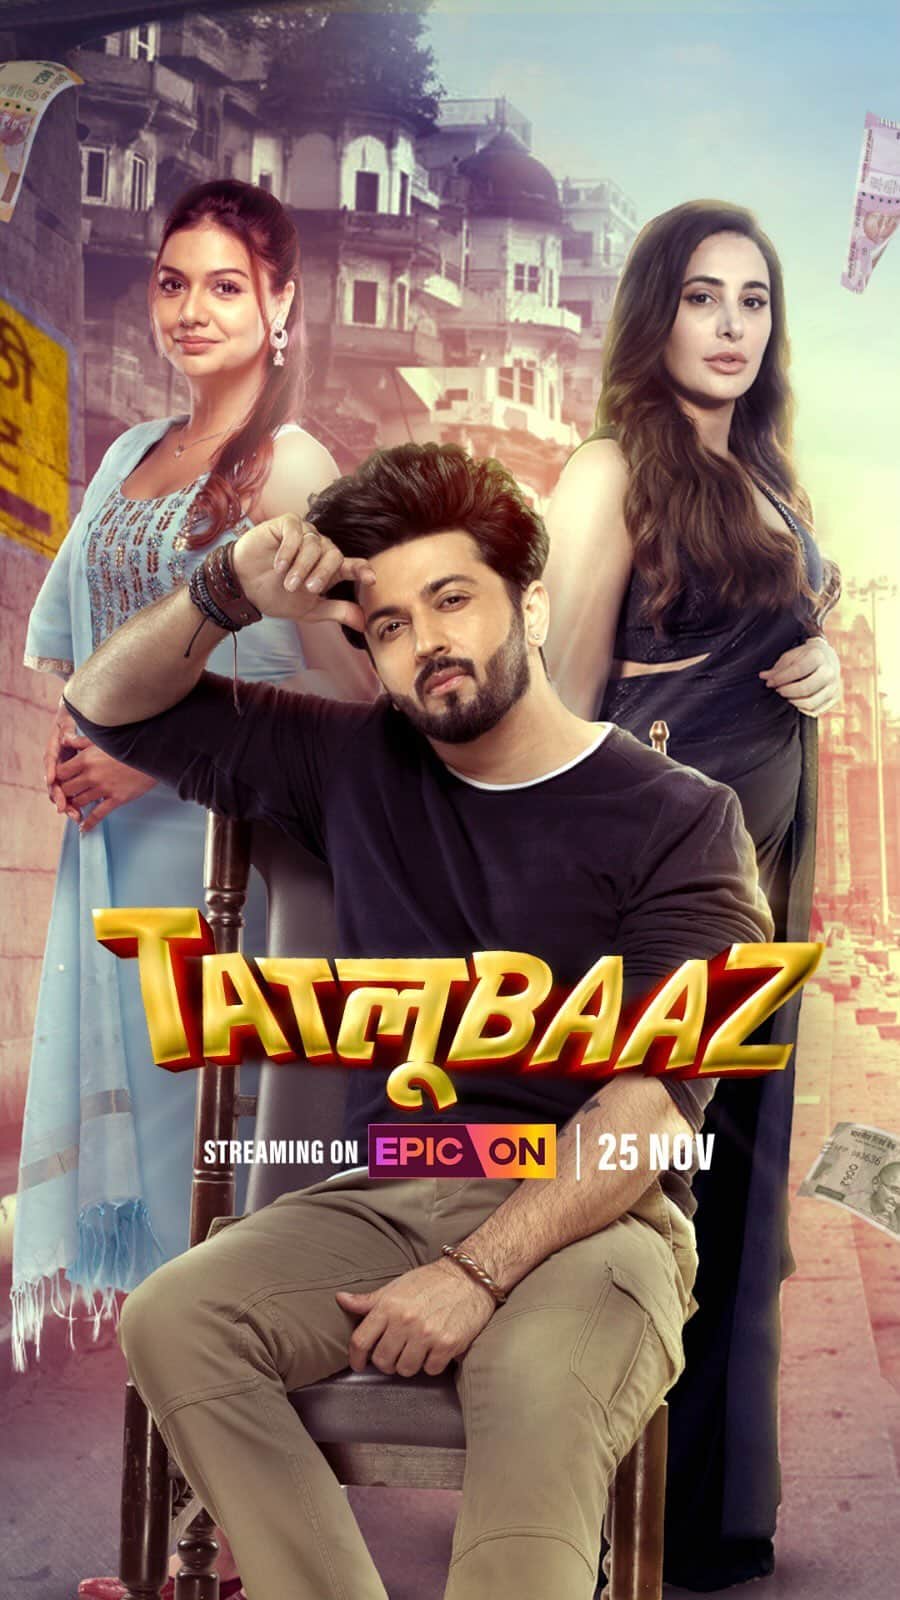 Nargis Fakhri のインスタグラム：「Get ready to groove with us on Tatlubaaz Title Track! Dheeraj Dhoopar, Nargis Fakhri, and Divya Agarwal are here to add some spicy flavor to your day. The song serves up laughter and a catchy beat which makes it a ticket to pure entertainment. Join the con man’s rollercoaster ride on 25th November 2023 only on India’s Best OTT Platform - Epic On!  Credits -  Singer: Saheb, Muskaan Tomar   Music Composer: Muskaan Tomar   Lyricist: Rajnish Yadav   Music Producer/Mixing & Mastering Engineer: Aabhaas Tomar   Recording Engineer: Pranil More   Vocals Recorded at 7 Sonik Studio, Mumbai  @theepicon @aditya_pittie  @sourjyamohanty @rainanjali @fatema.contractor  @tatlubaaz_the_show @apittie  @dheerajdhoopar  @nargisfakhri @divyaagarwal_official  @thegagananand  @zeishanquadri83  @karishmamodi23  @aakashdeeparora  @imvaquarshaikh @baljitsinghchaddha @tanveendugal  @avnitchadha  @kuljitchadha  @9pm.films  @vibhukashyap  @amandixit41  @in10medianetwork   #tatlubaaz #titletrack #epicon #streamingnow #newrelease #newsong #listennow #newrelease #newhindisong #dheerajdhoopar #nargisfakhri #divyaagrawal #hindisong #NewTitleTrack」